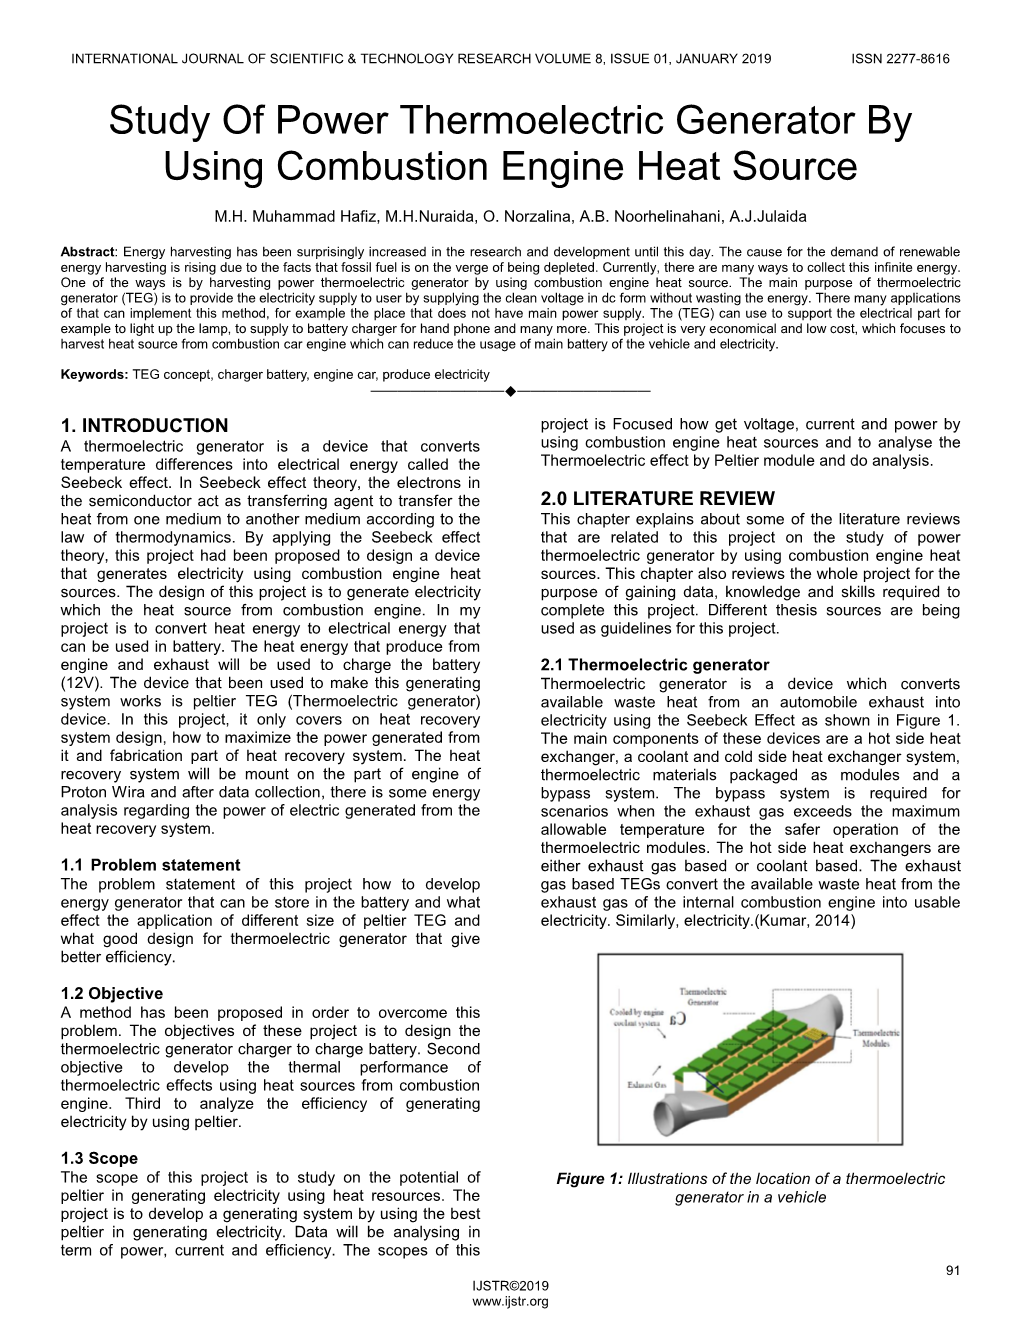 Study of Power Thermoelectric Generator by Using Combustion Engine Heat Source